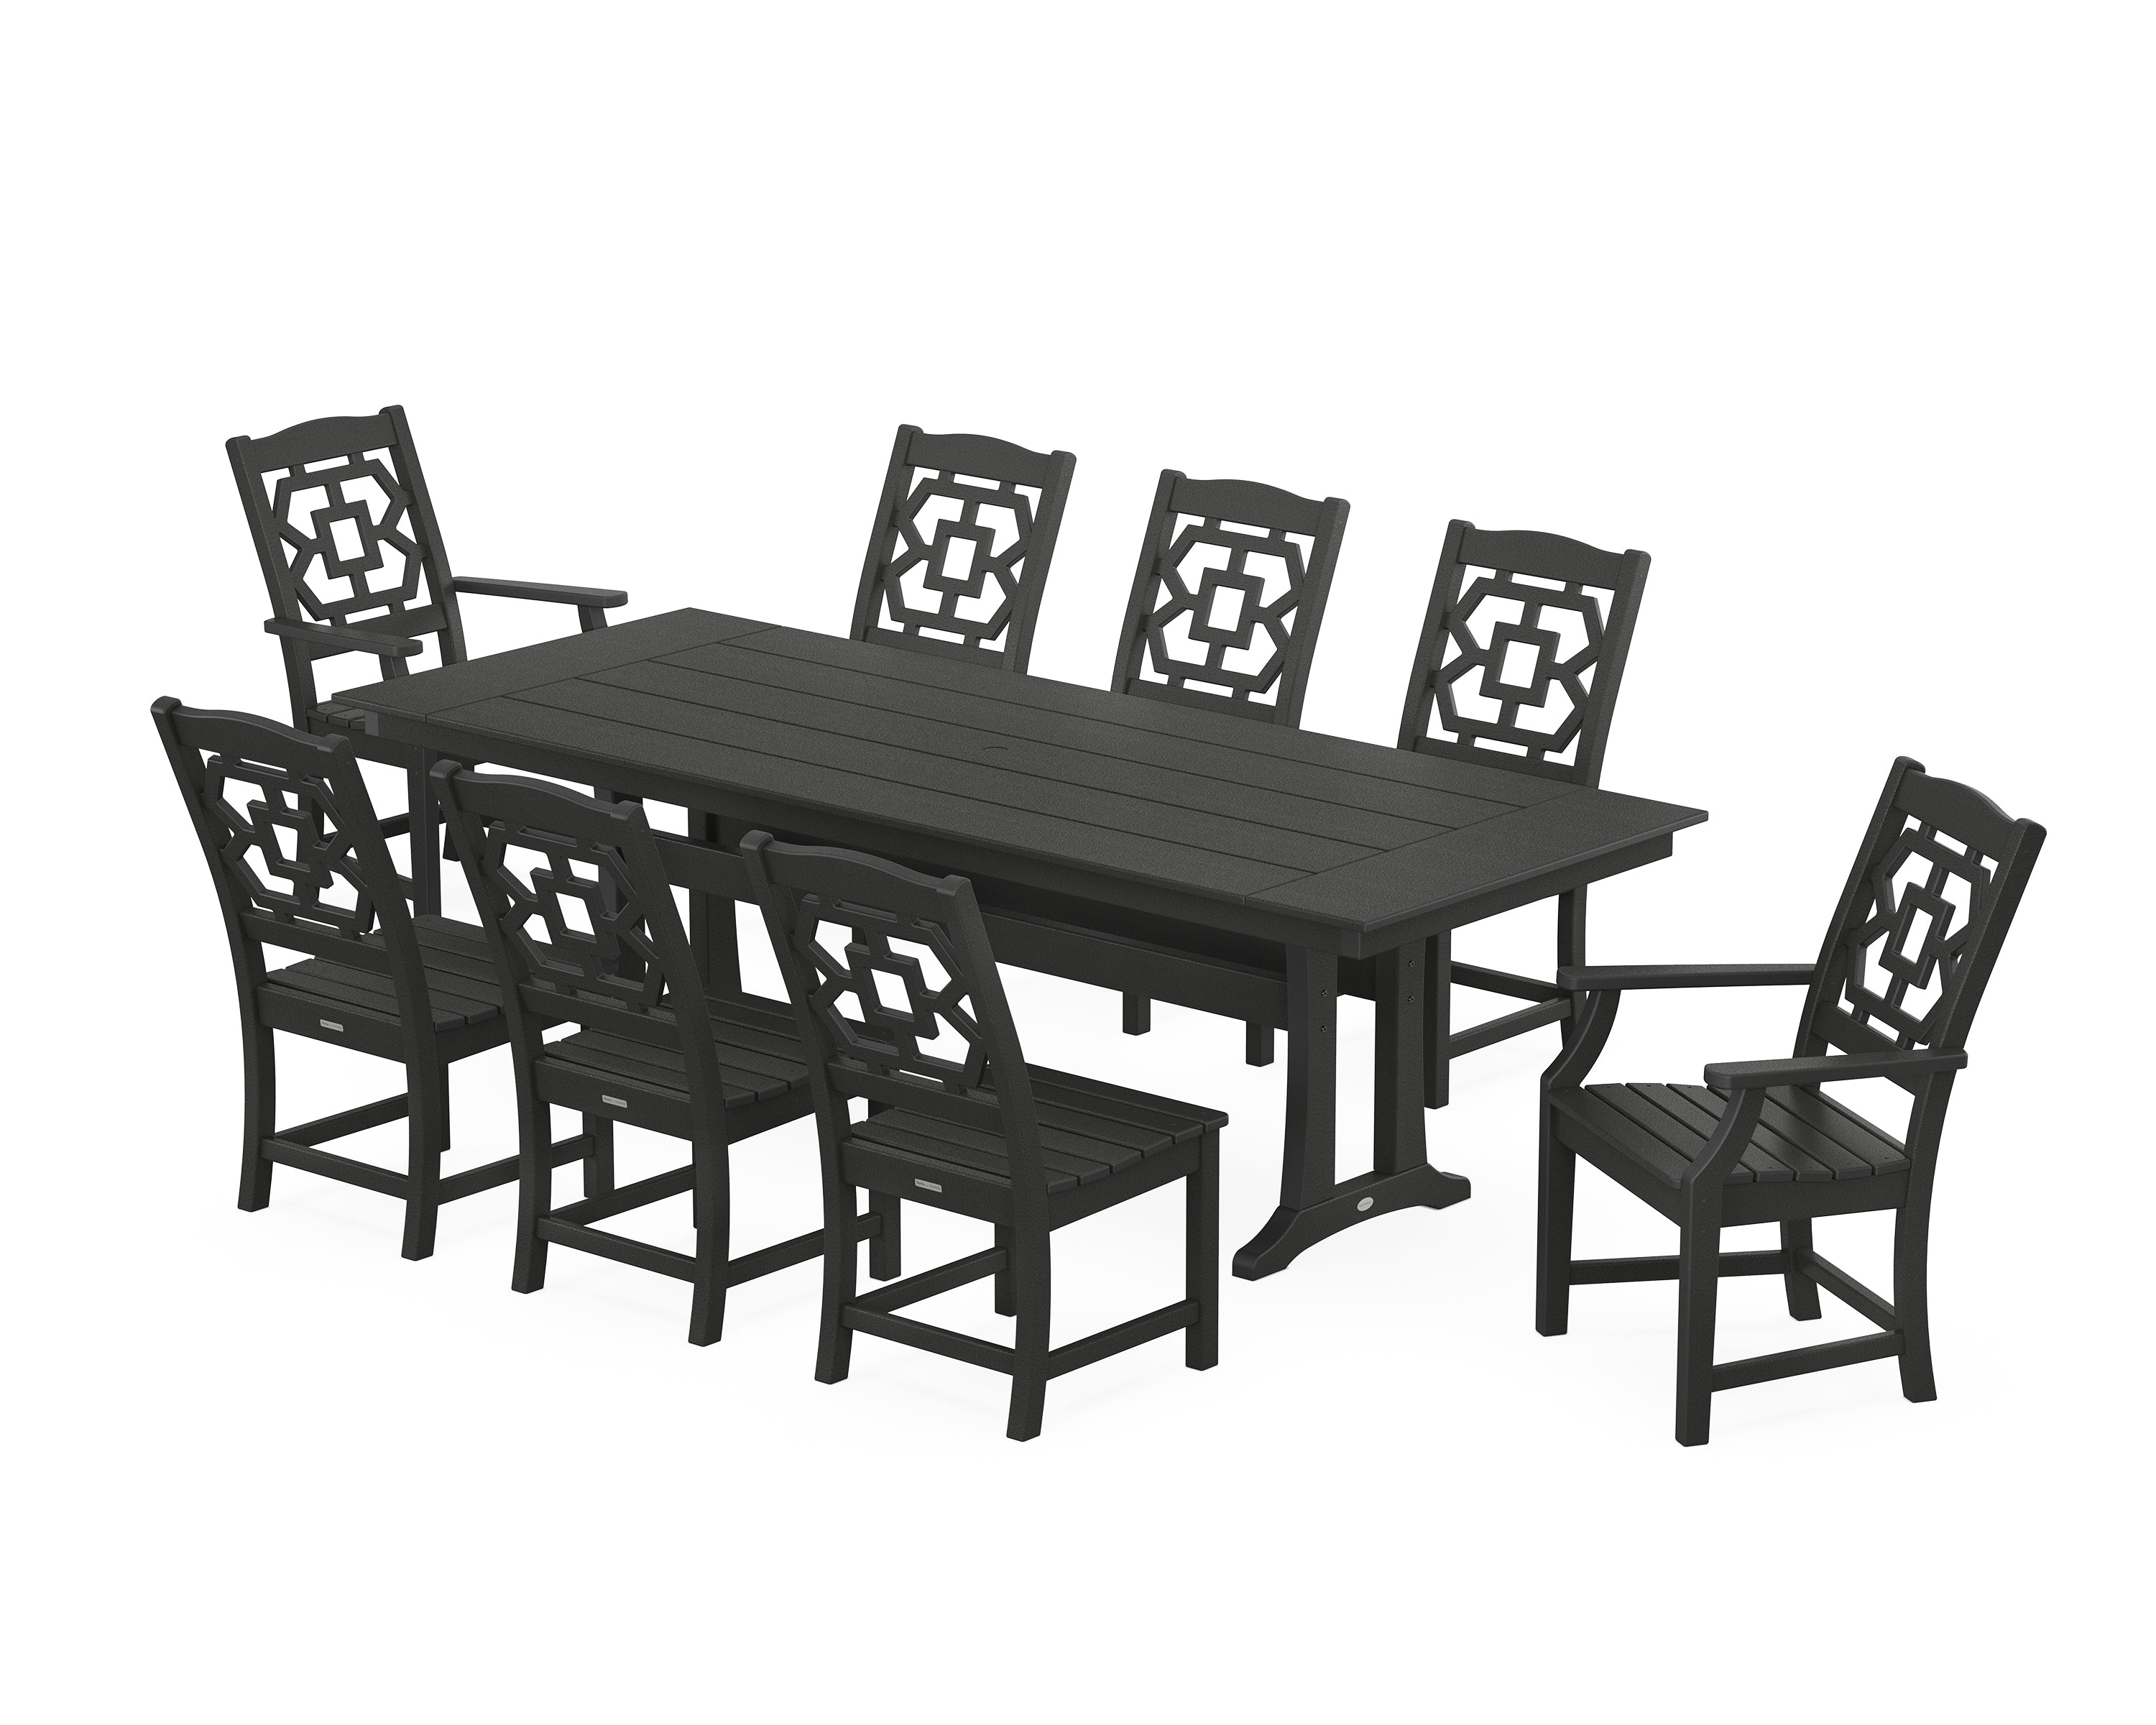 Martha Stewart by POLYWOOD® Chinoiserie 9-Piece Farmhouse Dining Set with Trestle Legs in Black